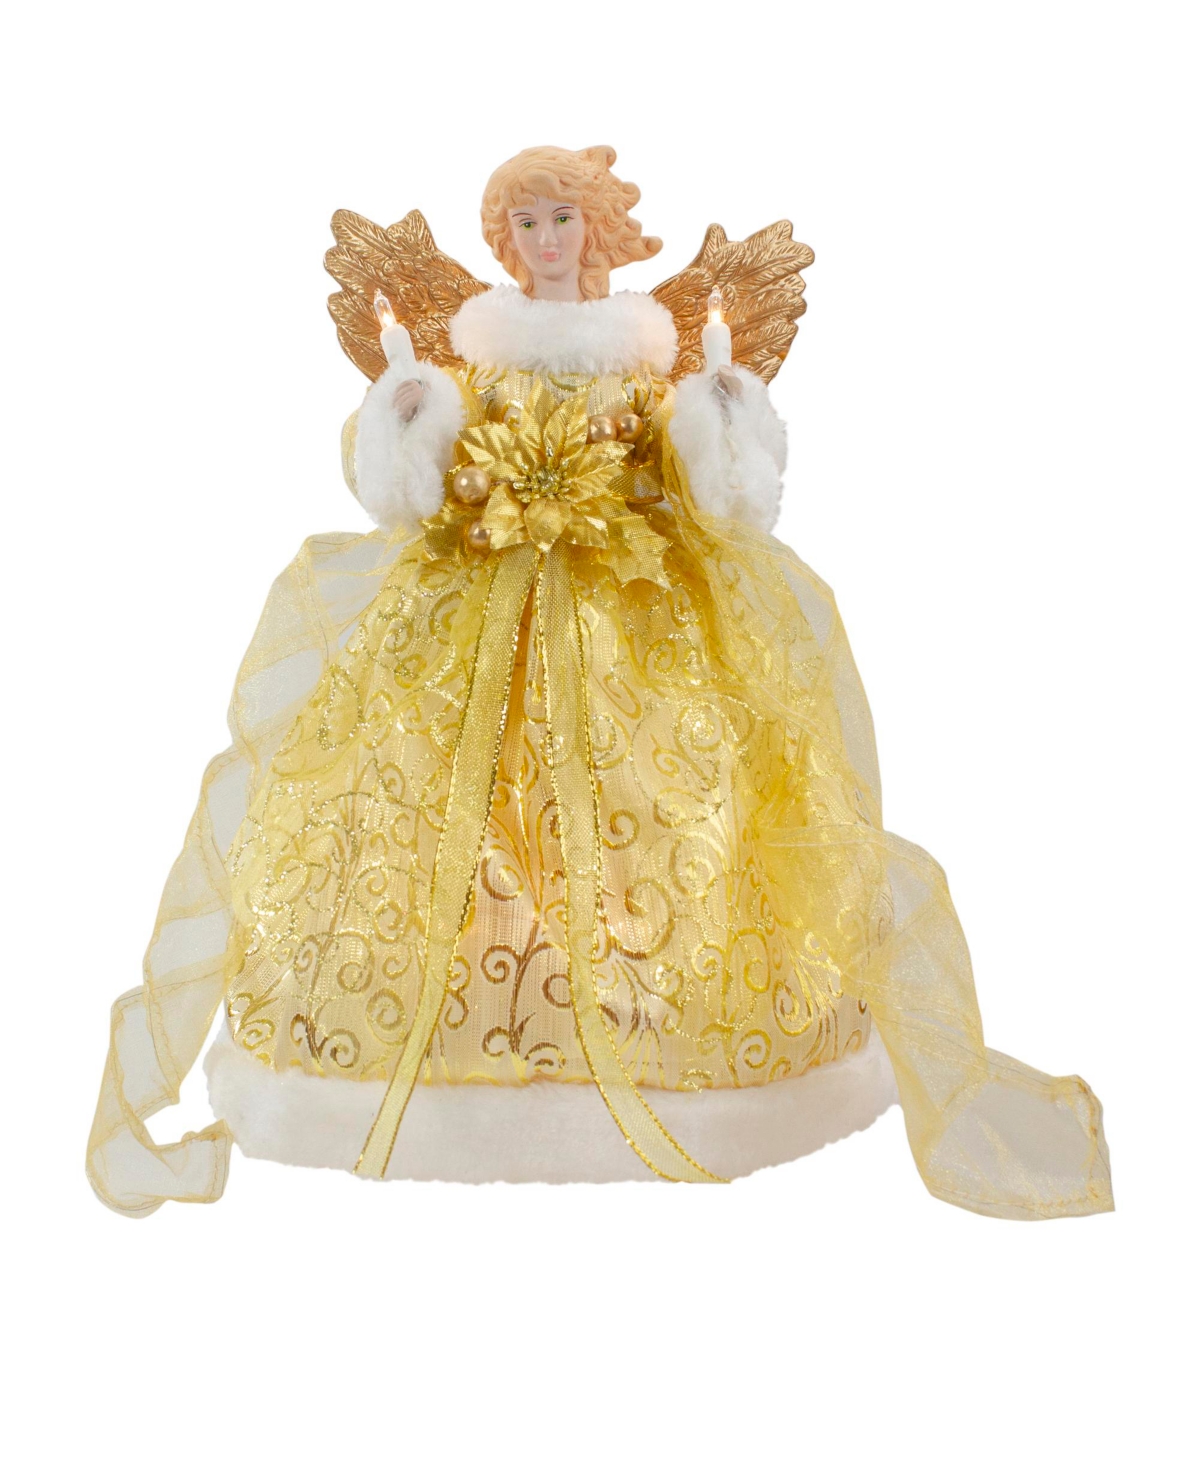 Lighted Angel With Wings Christmas Tree Topper With Clear Lights, 12" - Gold-Tone